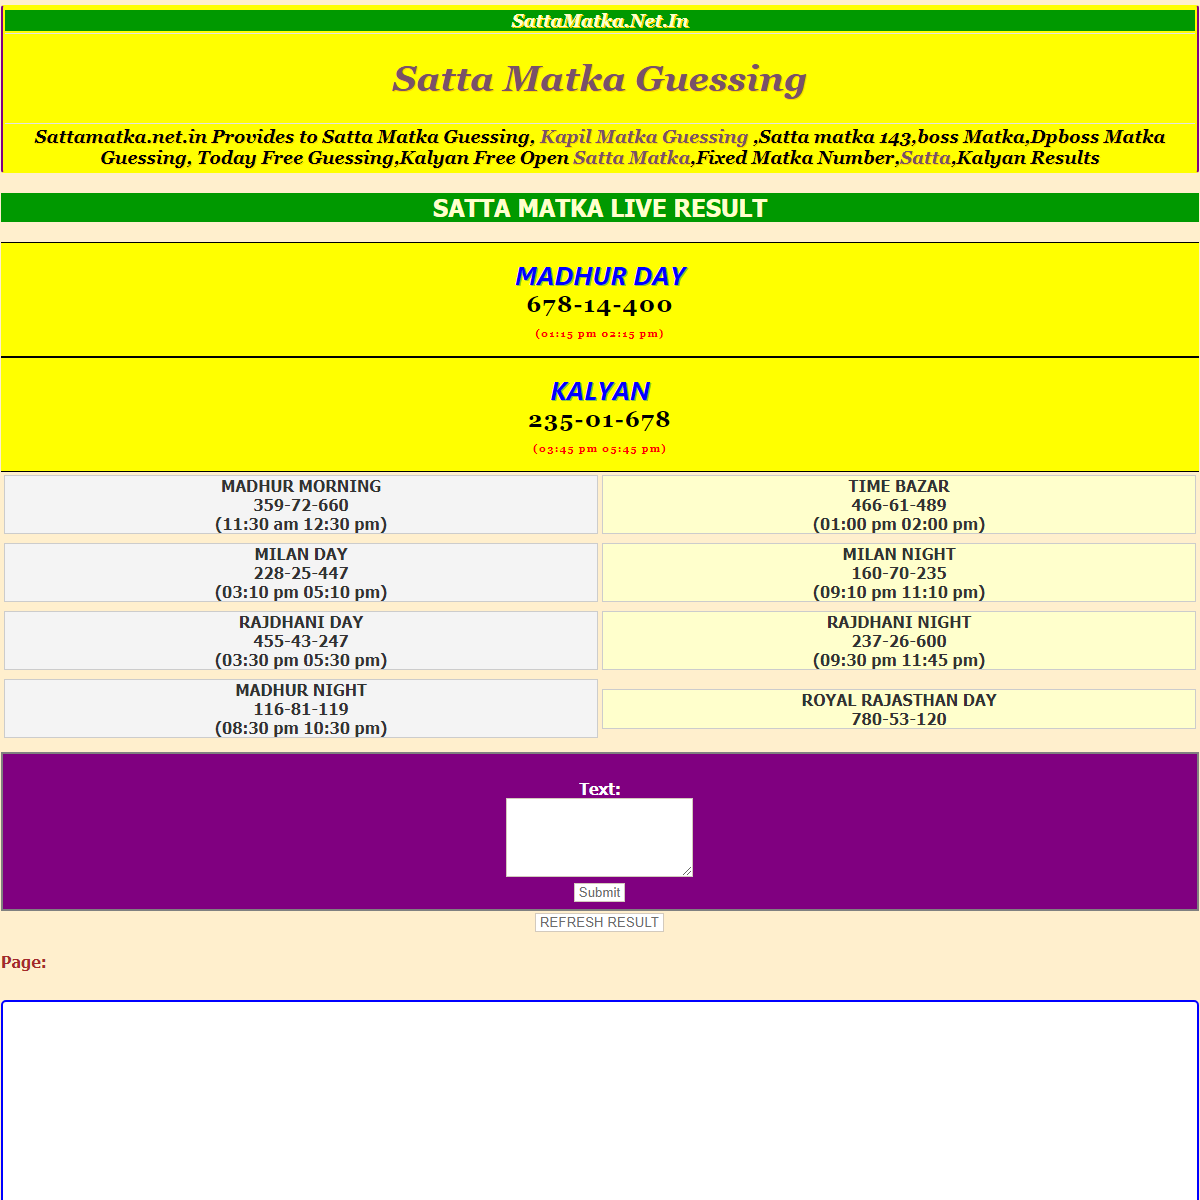 A complete backup of http://sattamatka.net.in/forum/index.php?page=6